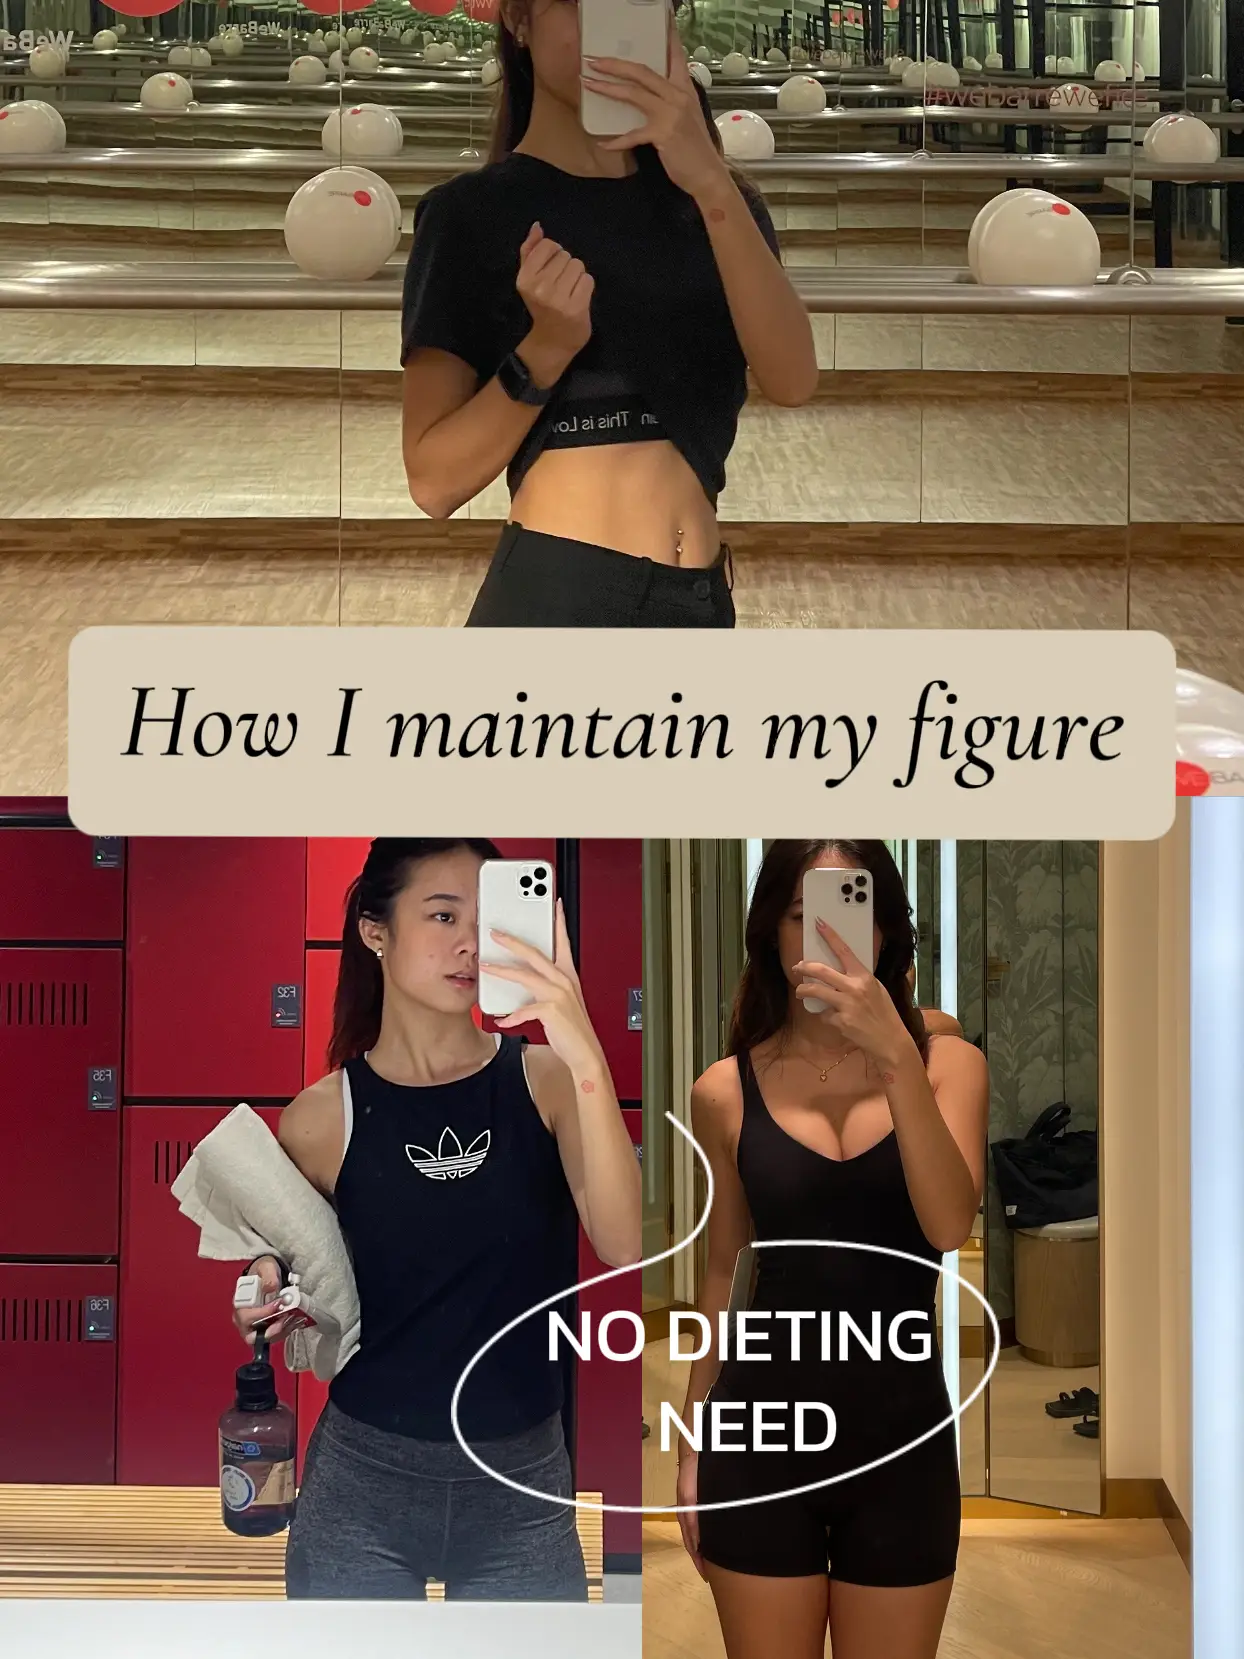 How you can get that sexy figure 👈🏼 COACH POV's images(0)